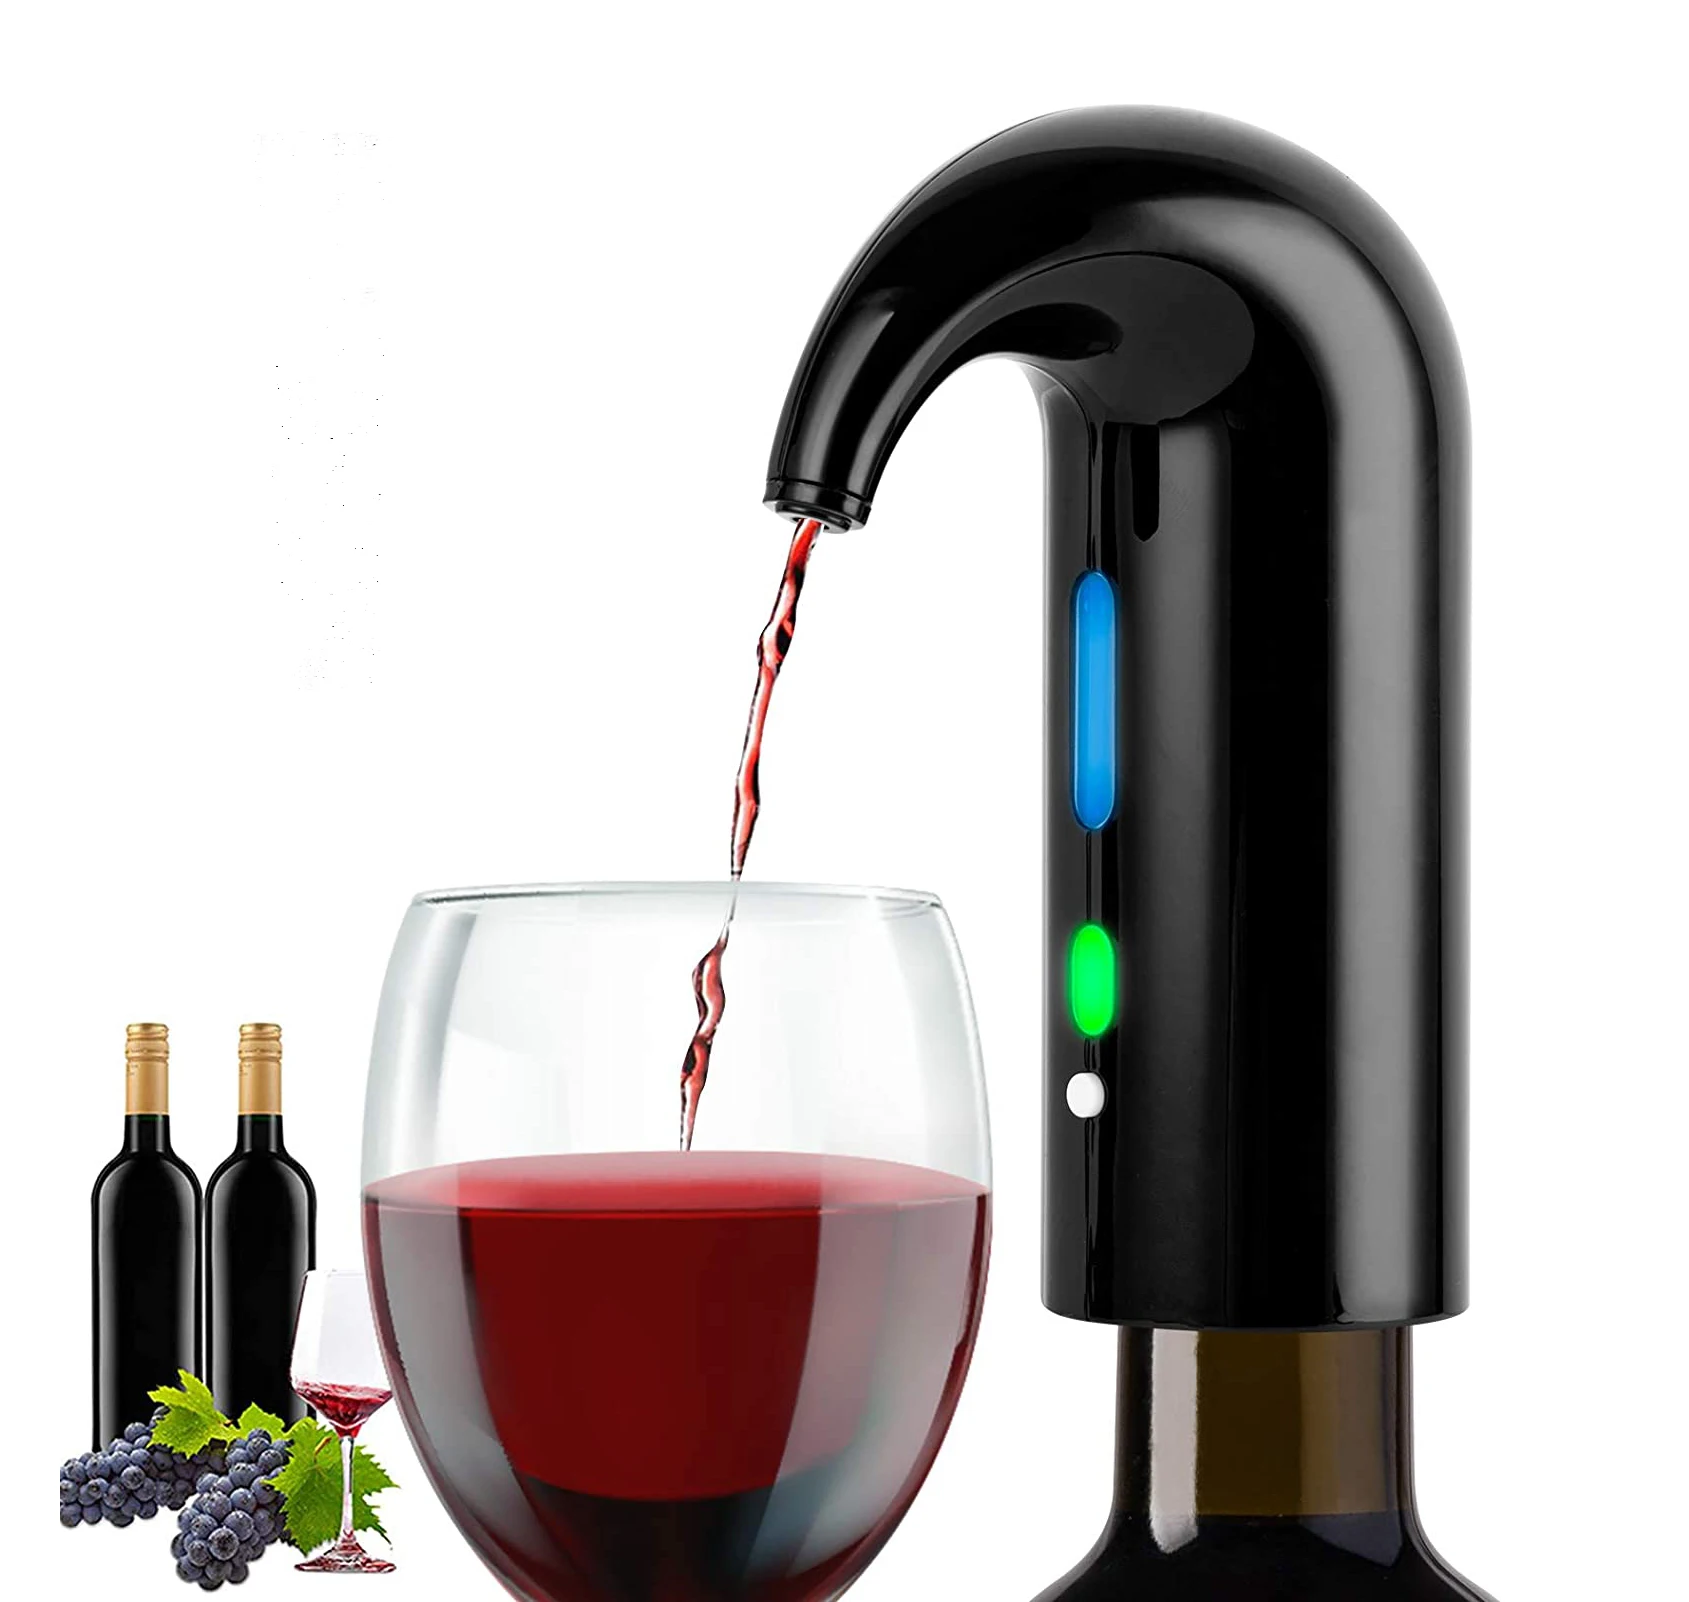 

Best Selling Christmas Gadget Rechargeable Wine Dispenser Pump Automatic Electric Wine Aerator Pourer FasT Decanting, Red, black, white